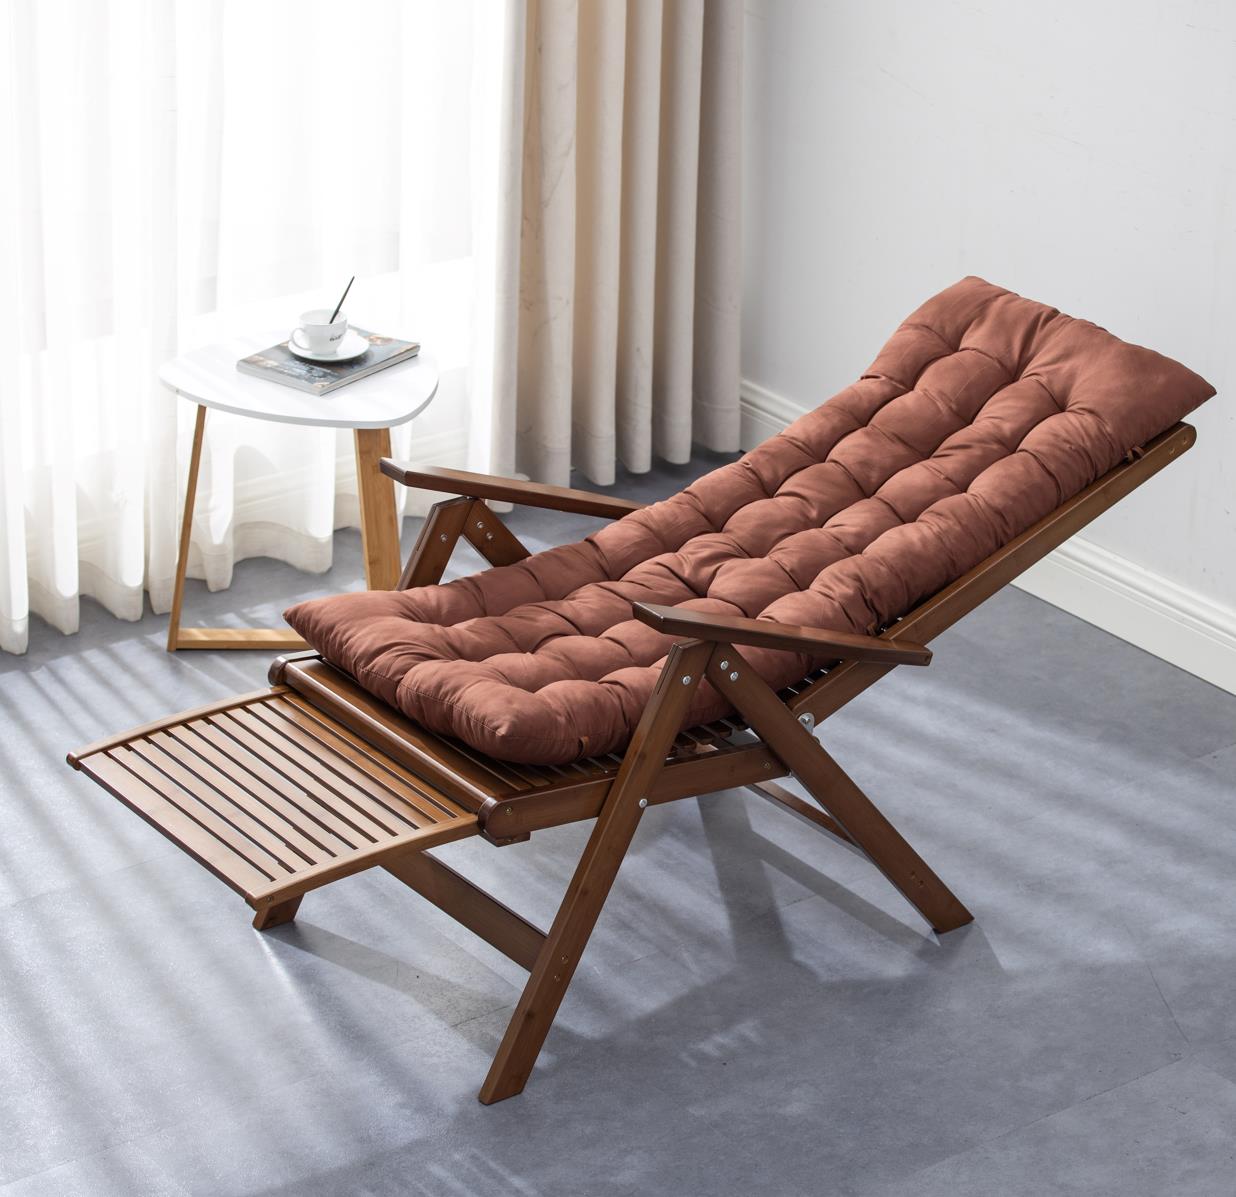 Foldable Bamboo Backrest Adjustable Chair